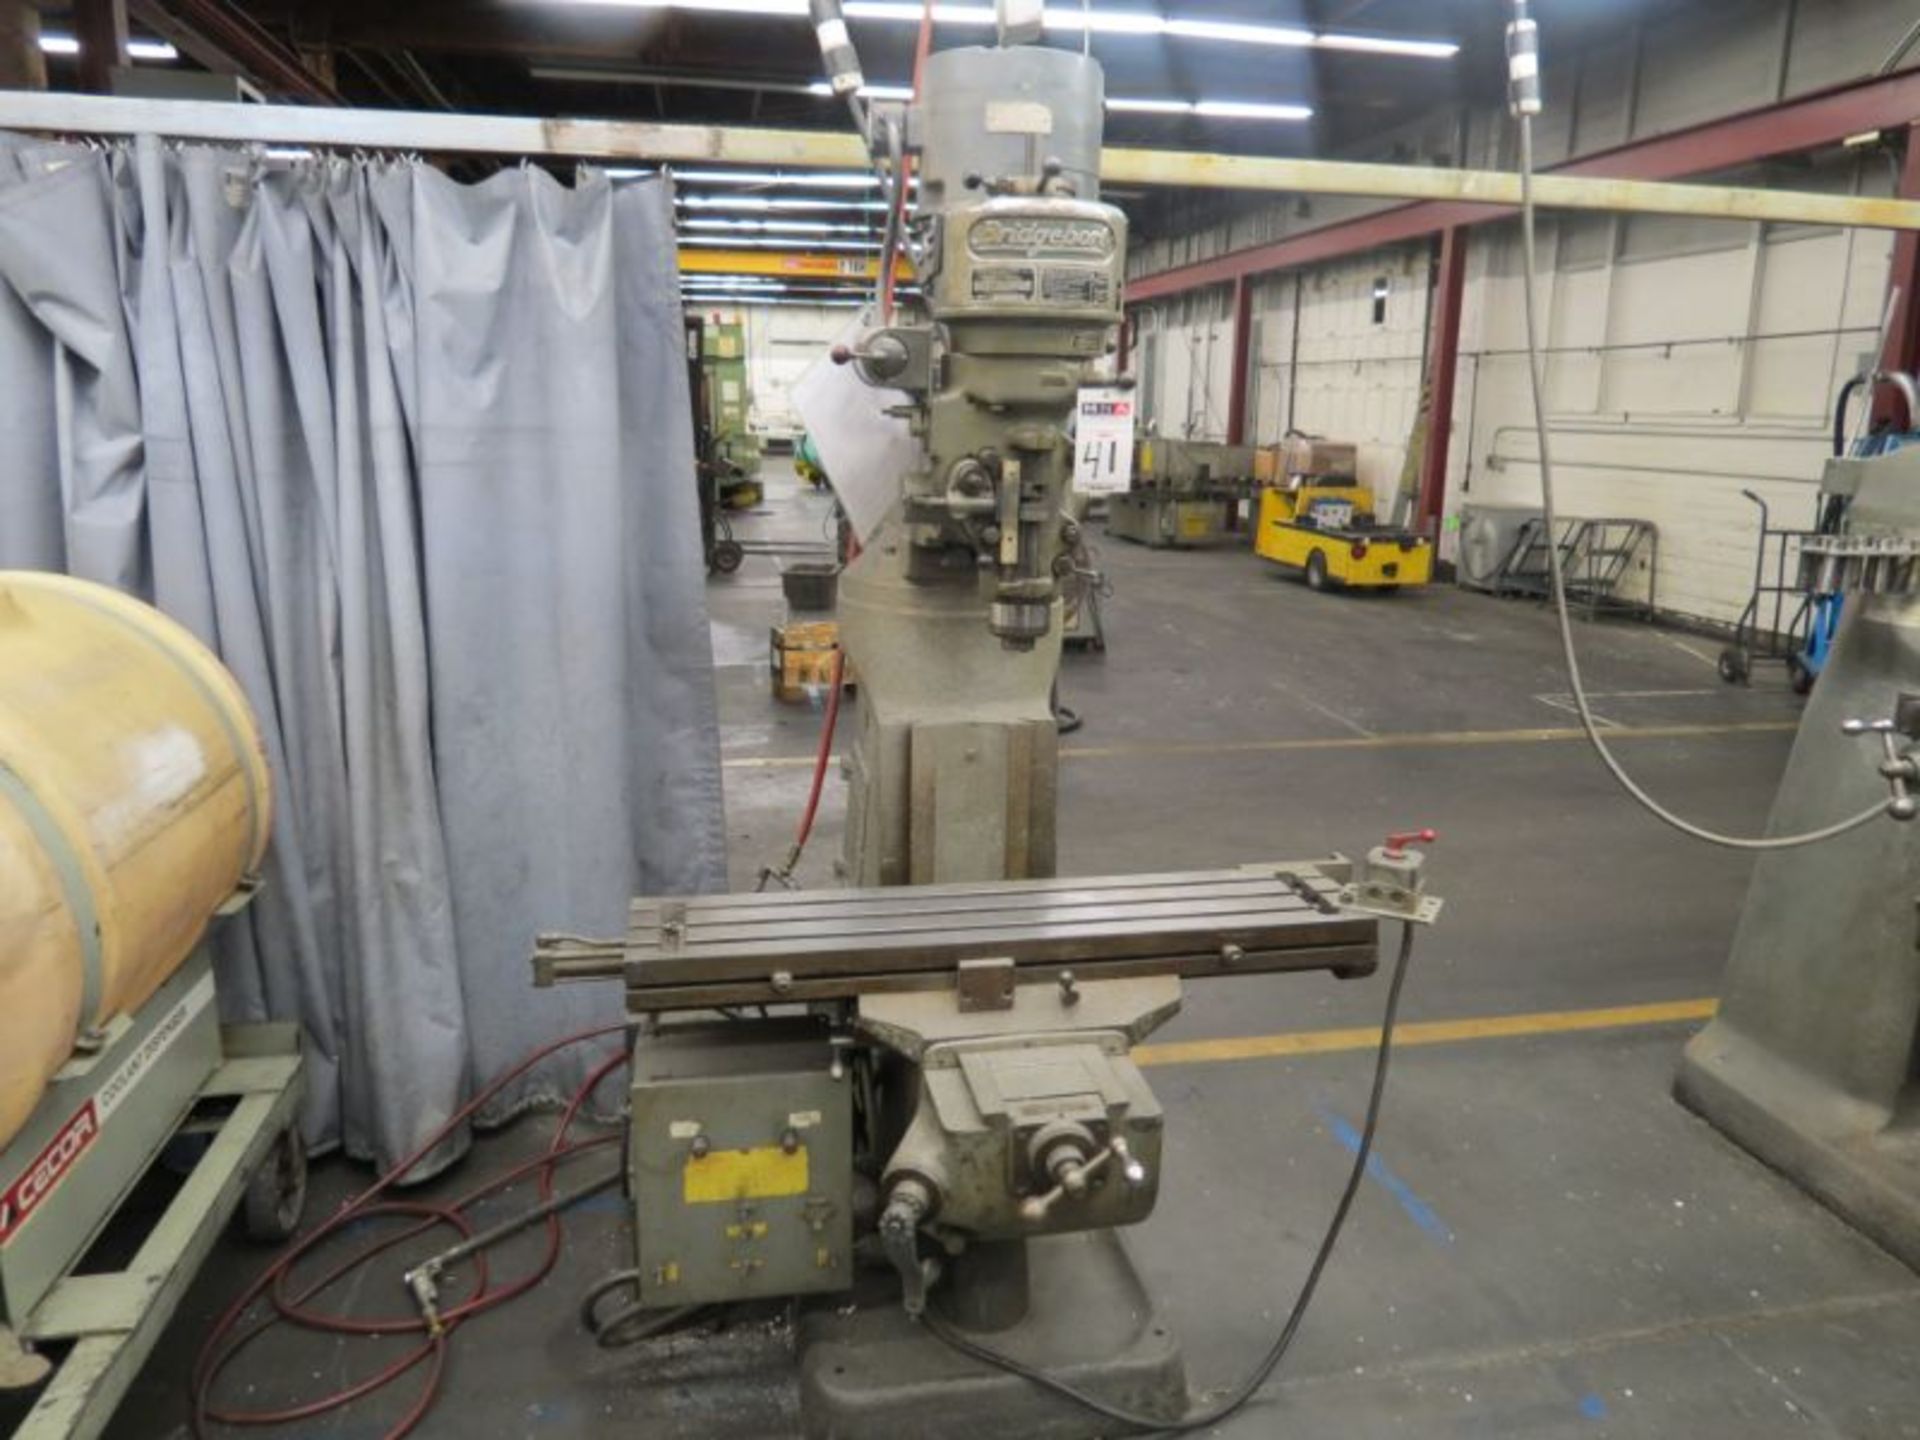 Bridgeport Vertical Mill 9" x 42" Table, w/ Hydraulic X-Axis Feed, s/n J115054 - Image 4 of 5